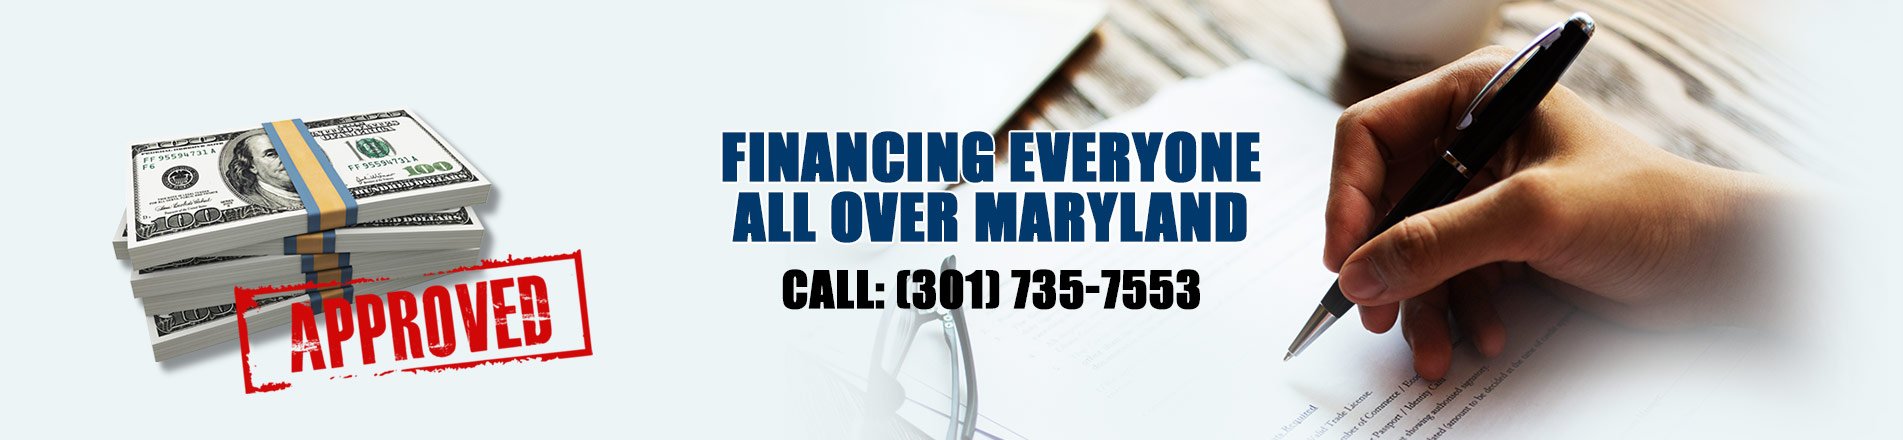 Financing everyone all over maryland